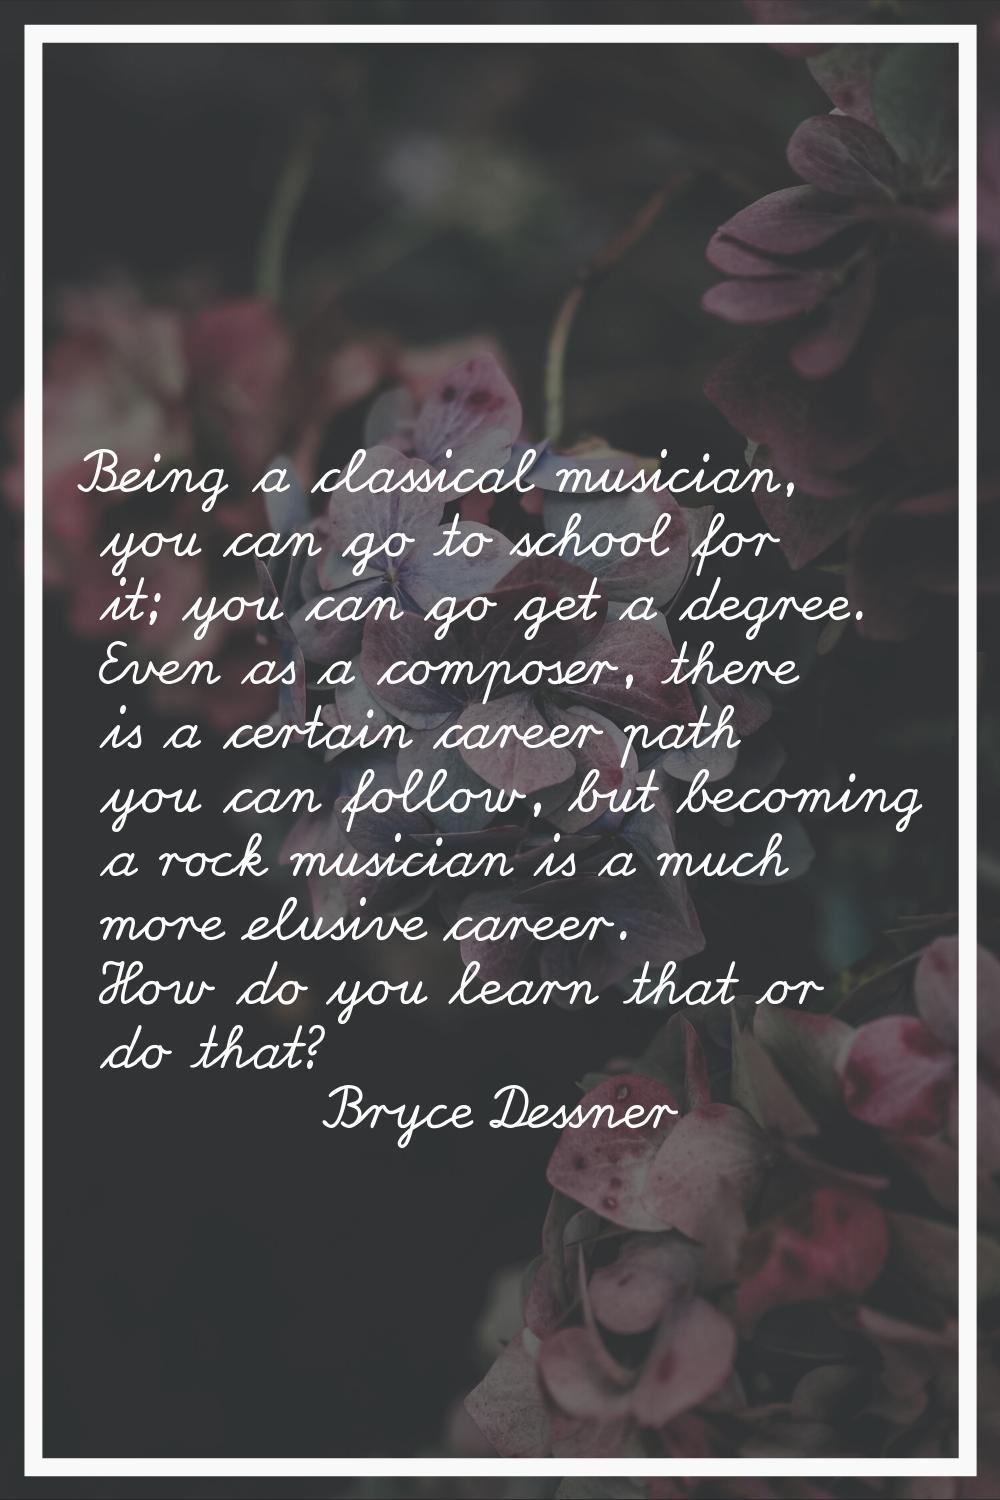 Being a classical musician, you can go to school for it; you can go get a degree. Even as a compose